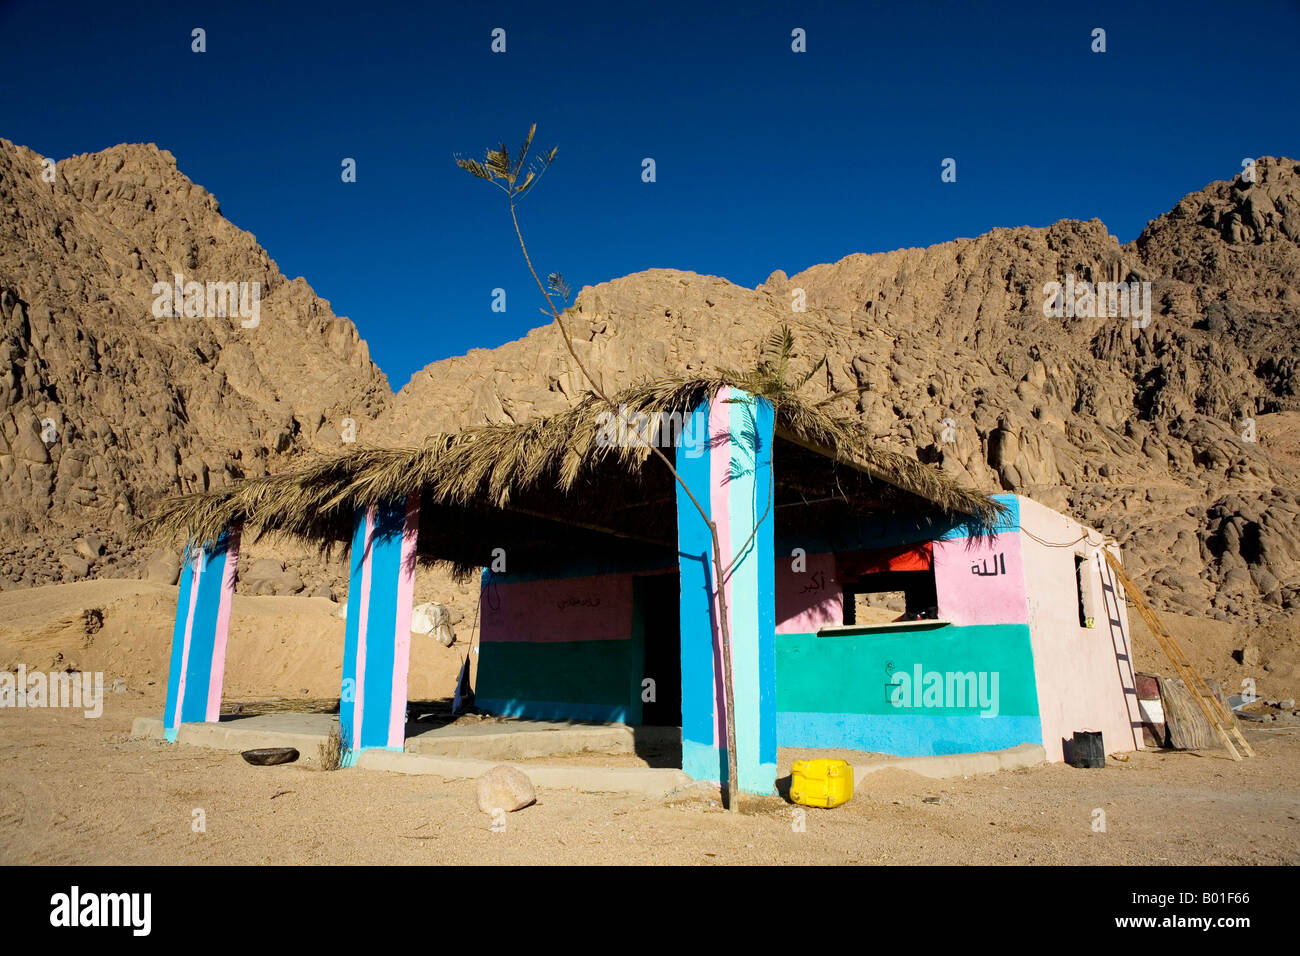 Bedouin s home in the desert landscape surrounded by the Red Sea Mountains of South Sinai near Sharm el Sheikh Egypt Stock Photo